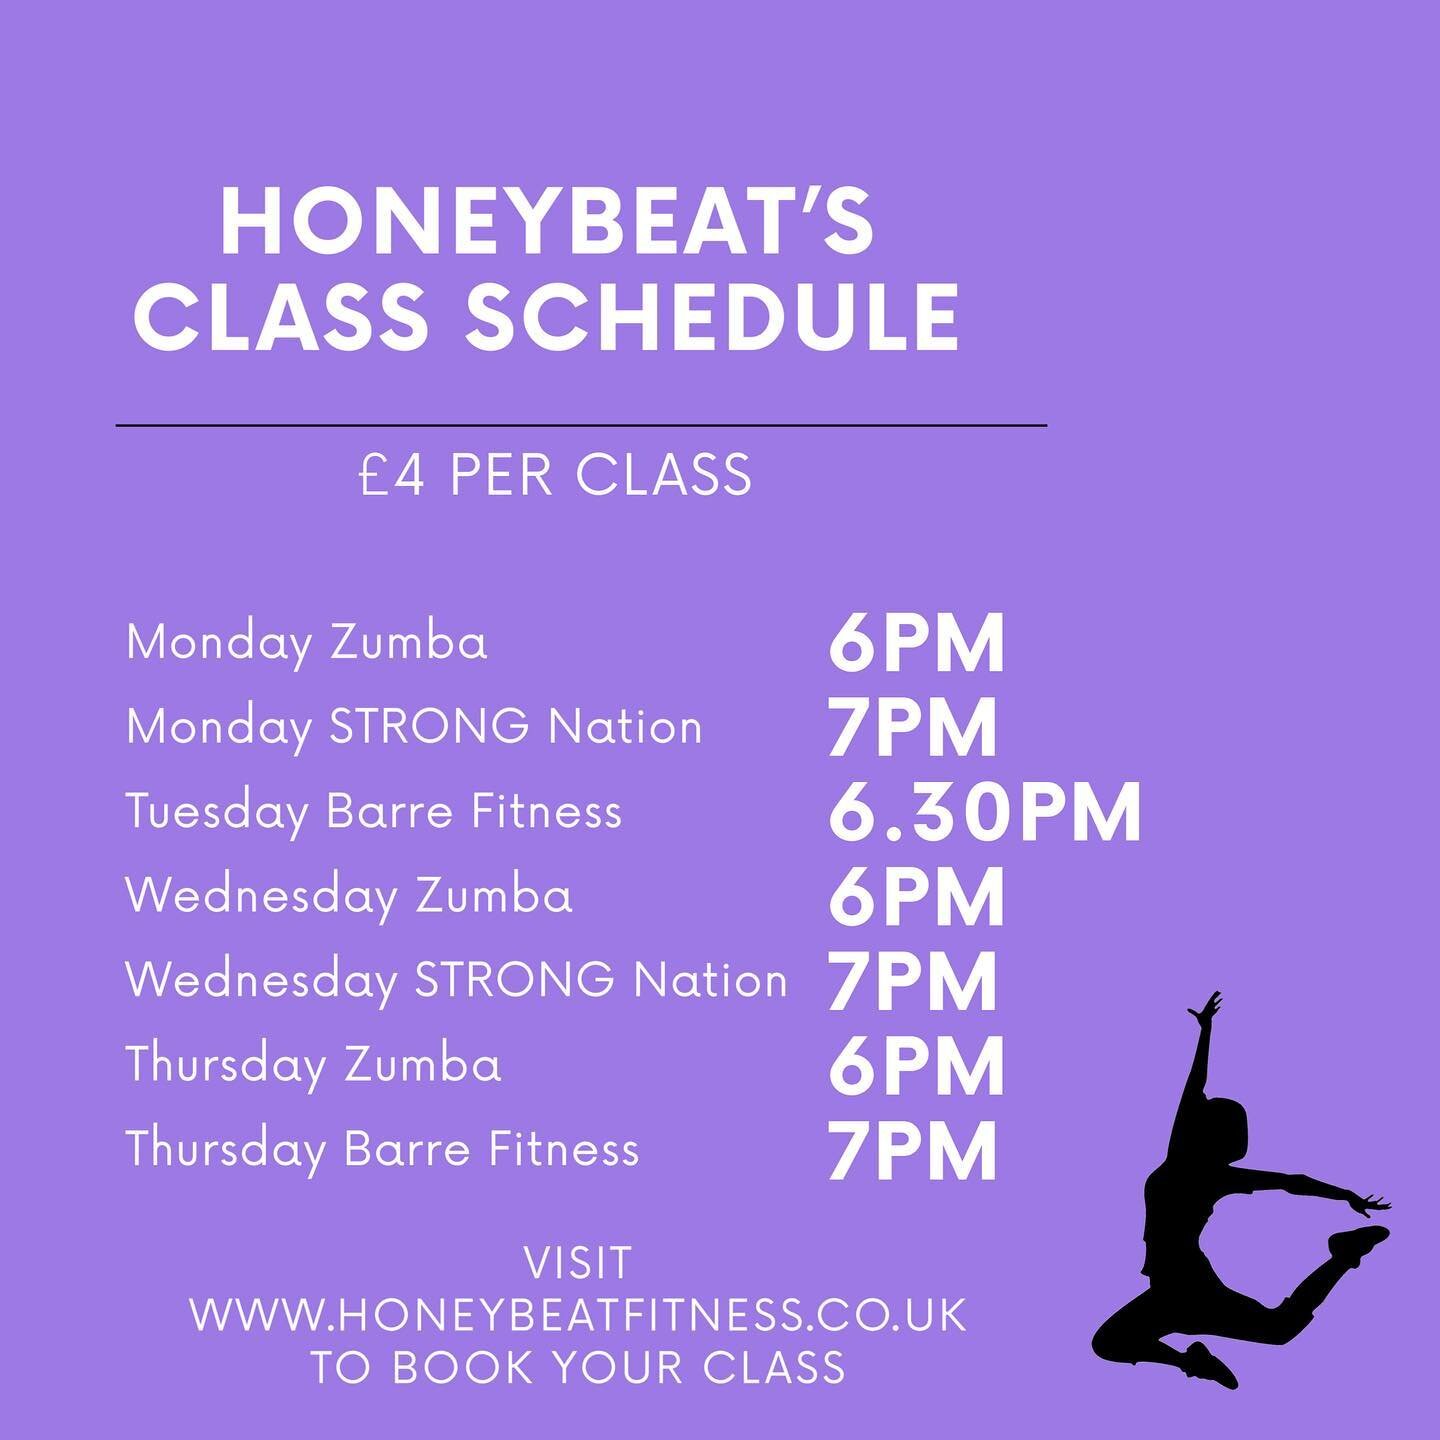 🌟A T T E N T I O N 🌟 

Our NEW class schedule is going live from tomorrow. We have a few new changes to the timetable, so please take a look and see if there is a class for you! All classes are 1 hour long and live from ZOOM. &pound;4 per class onl